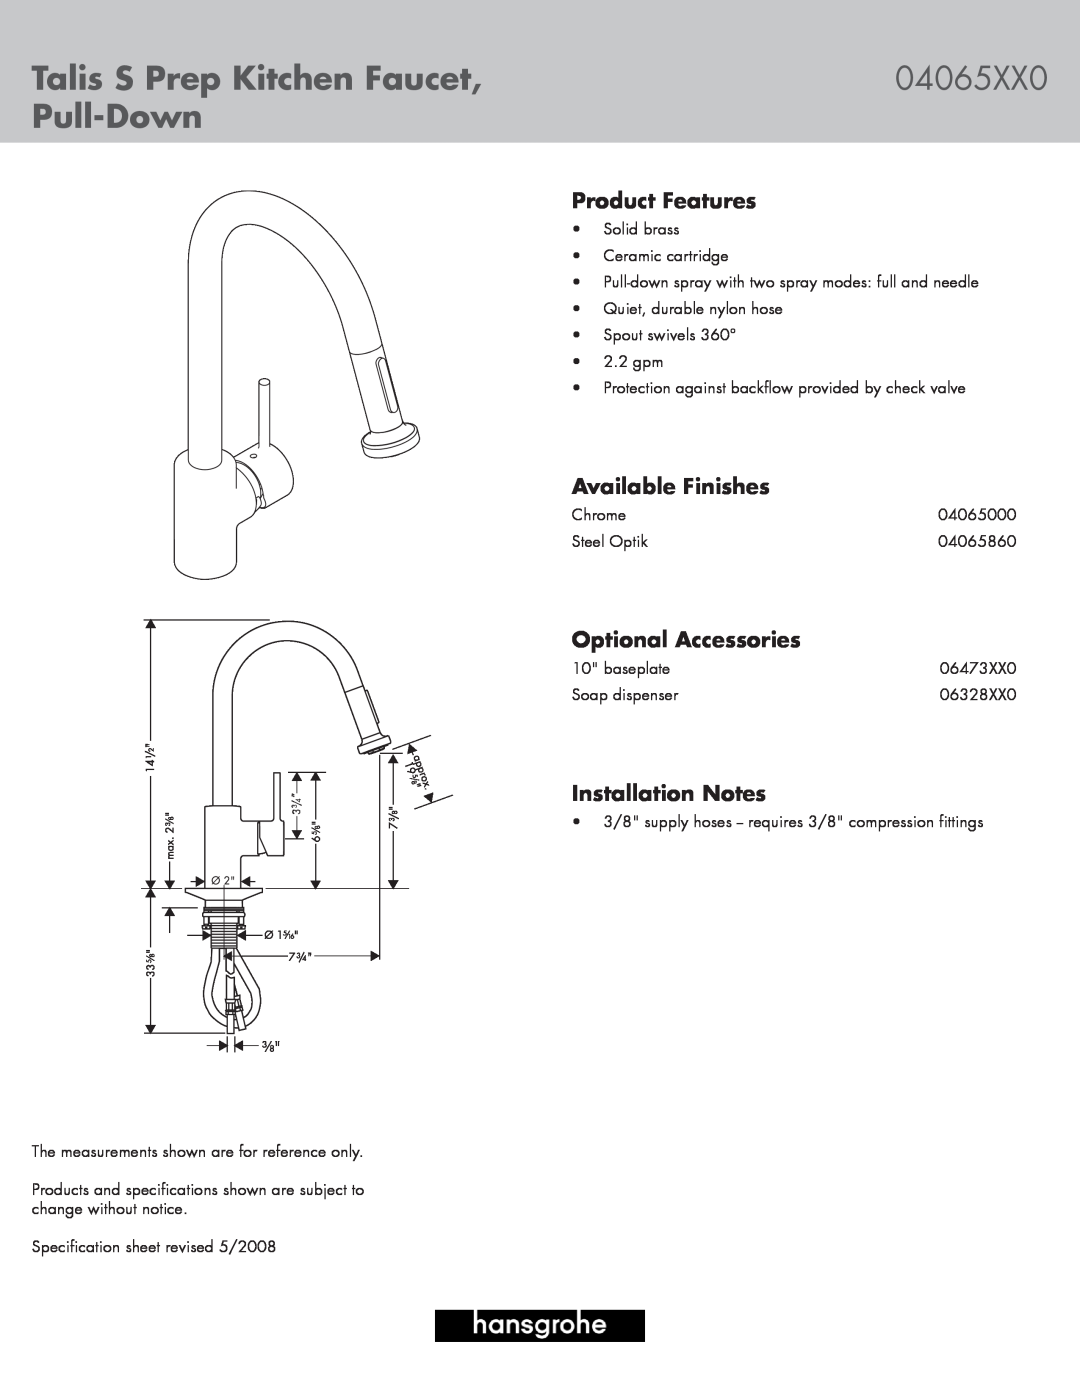 Hans Grohe 04065XX0 specifications Talis S Prep Kitchen Faucet, Pull-Down, Product Features, Available Finishes 